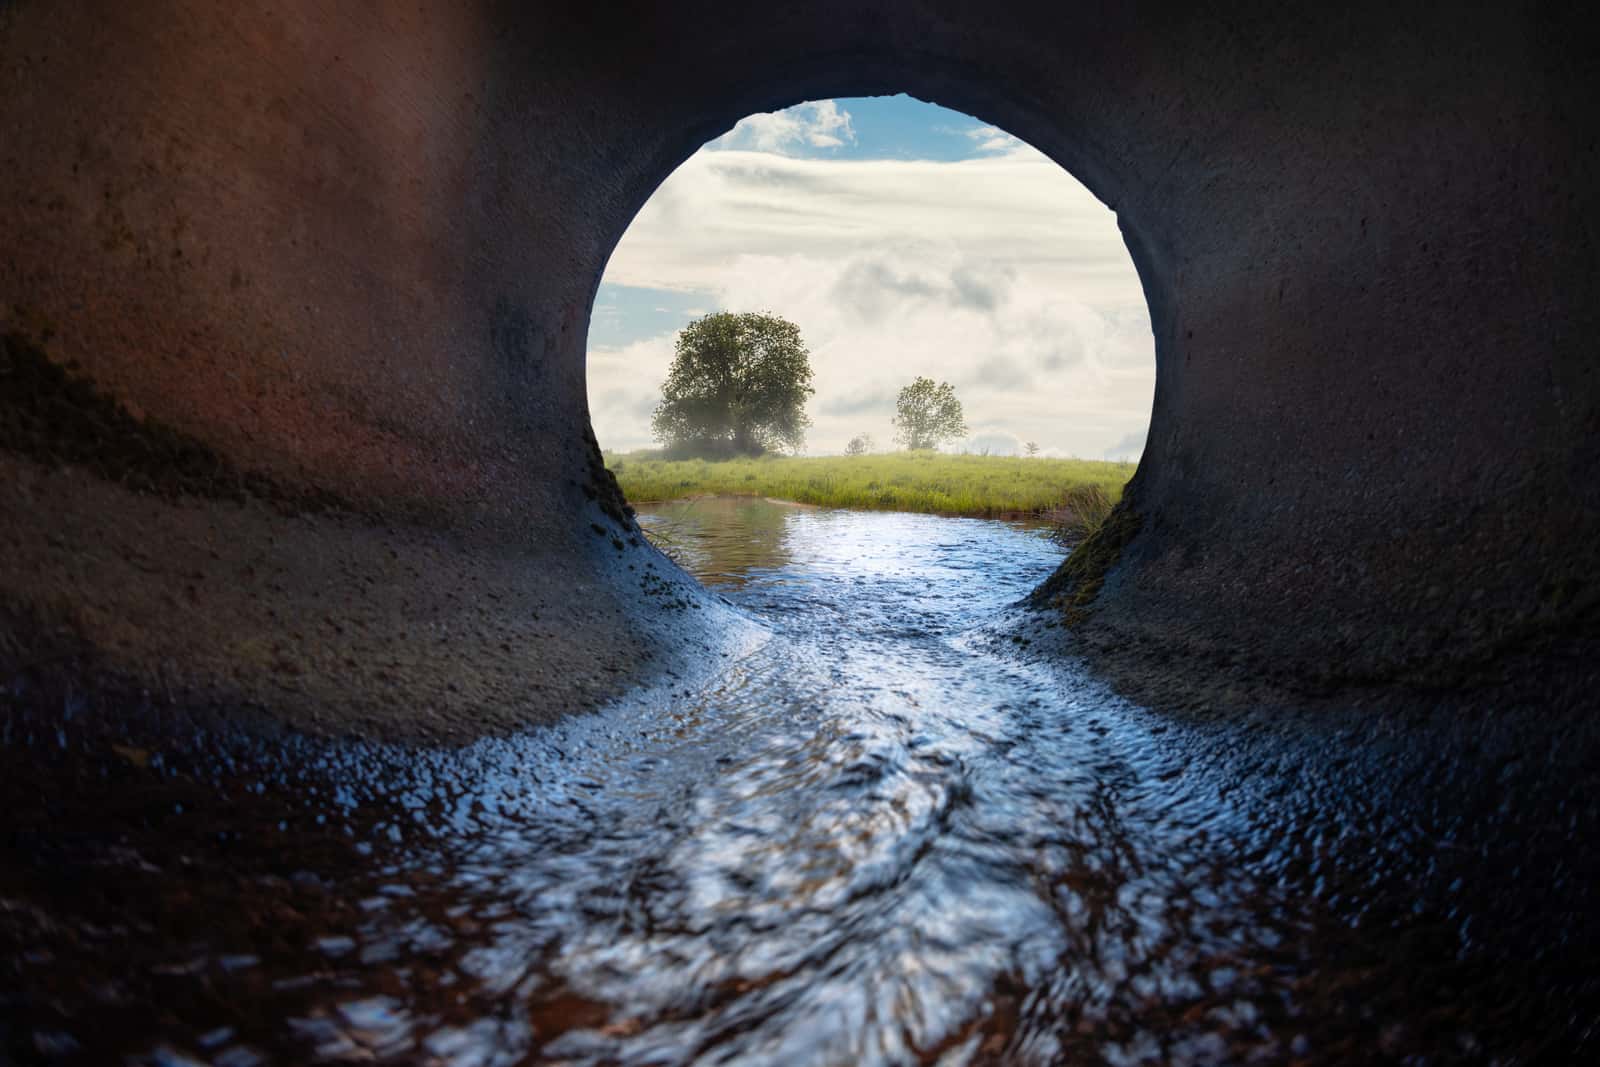 Image of sewer pipe, inside view with running water. Meadow and tree in the background.